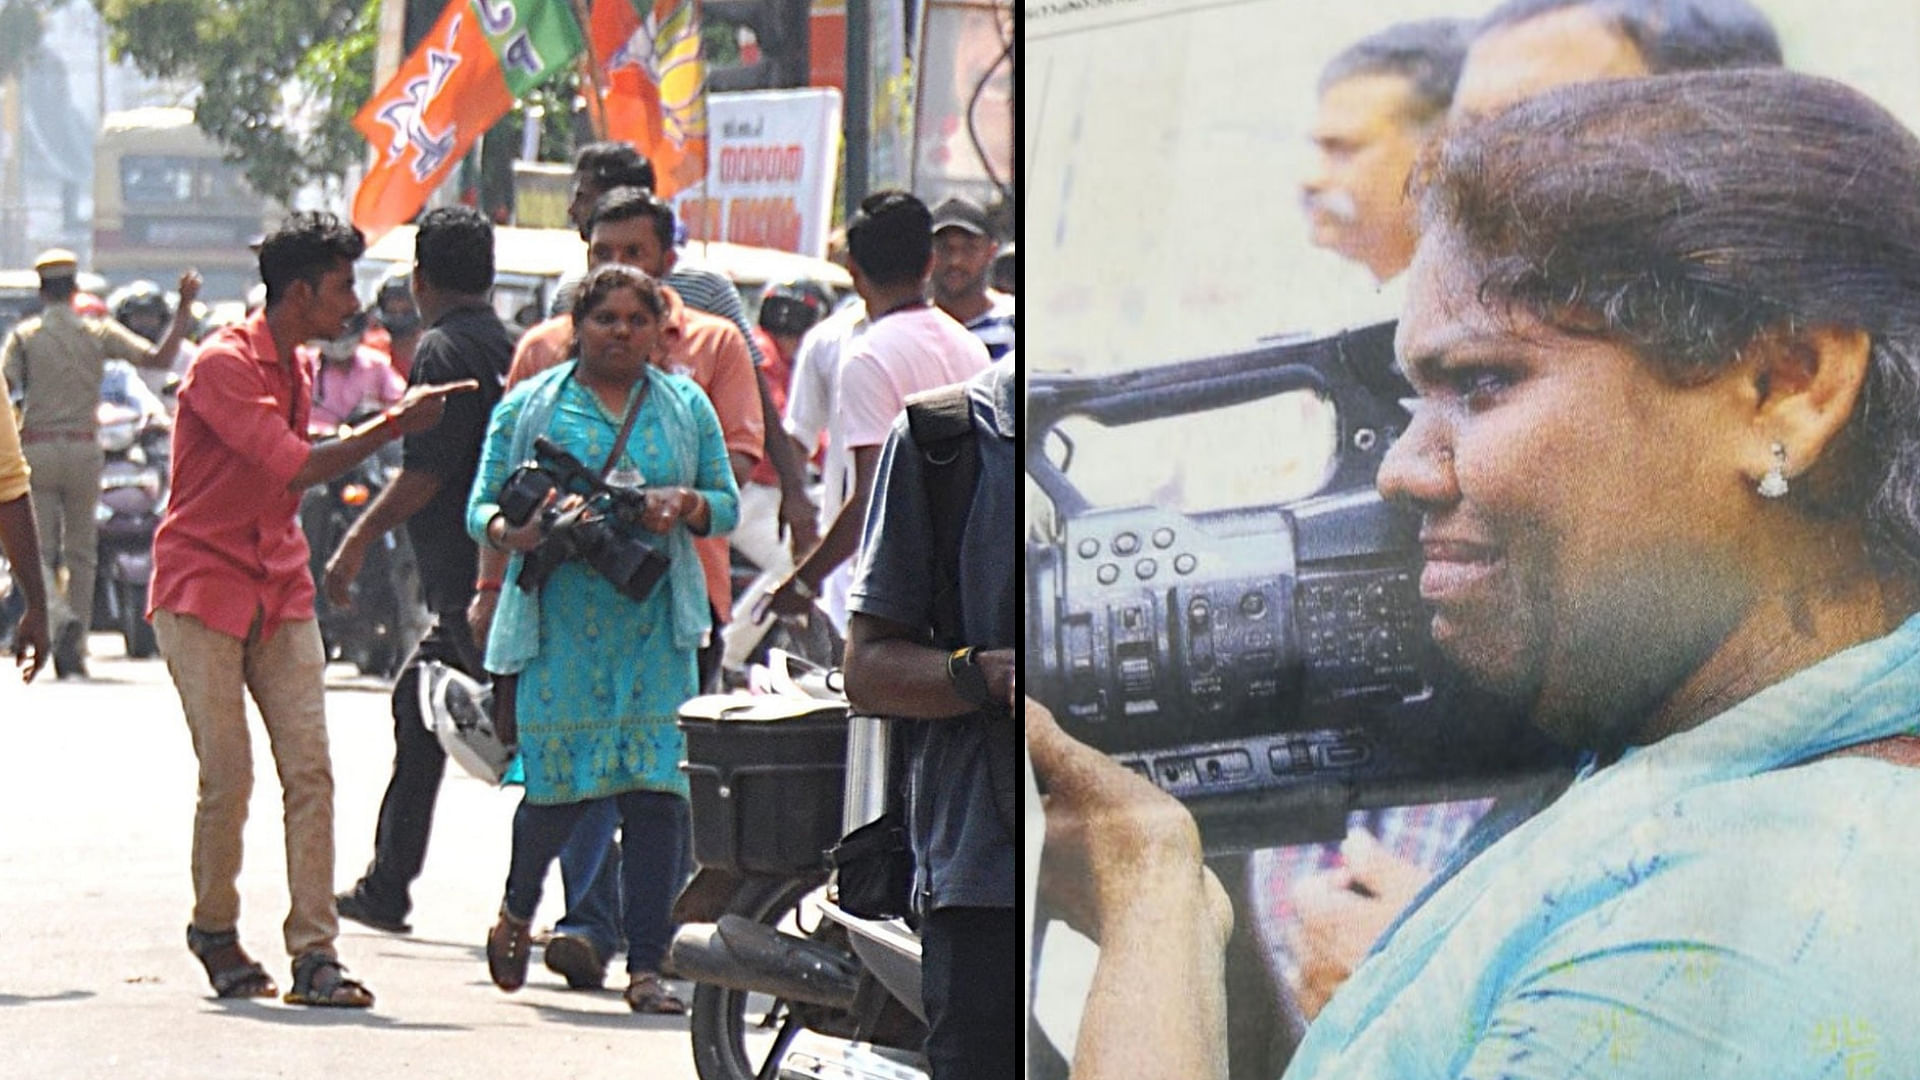 Shajila Ali Fathima, a cameraperson with Kairali TV, was heckled by BJP workers while covering Sabarimala protests.&nbsp;